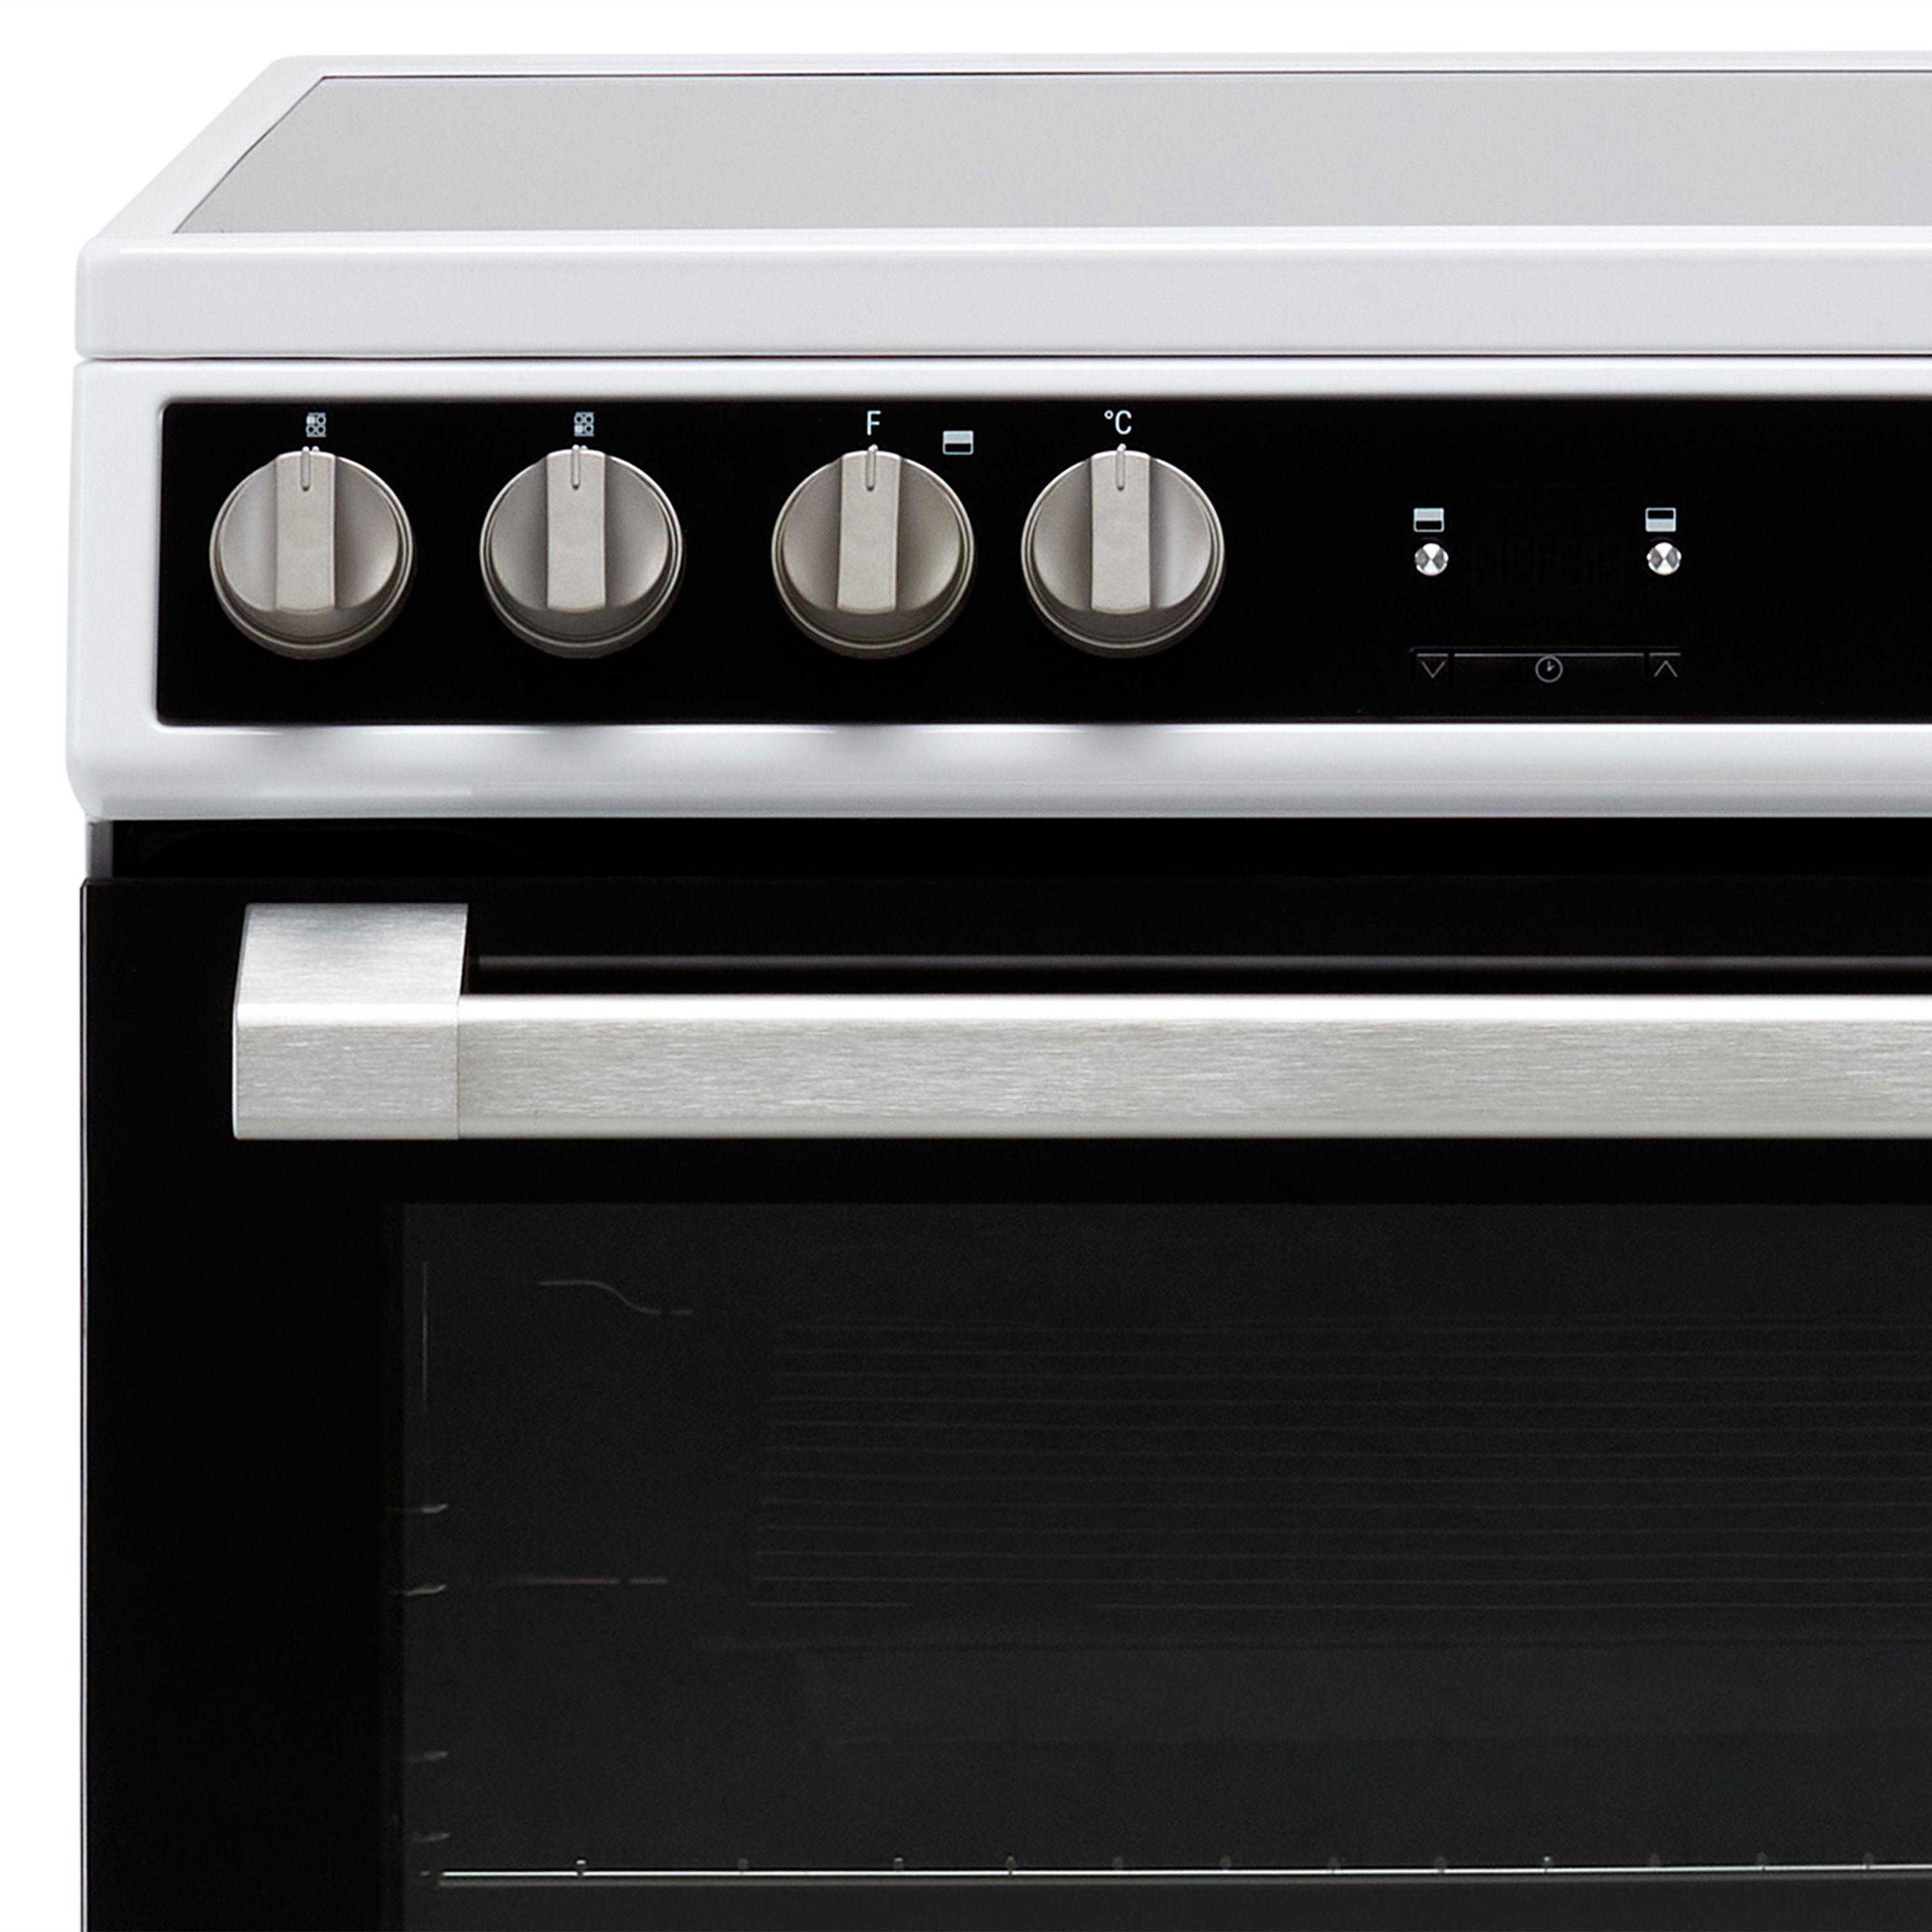 Hotpoint HDT67V9H2CW/UK_WH 60cm Double Electric Cooker with Ceramic Hob - White